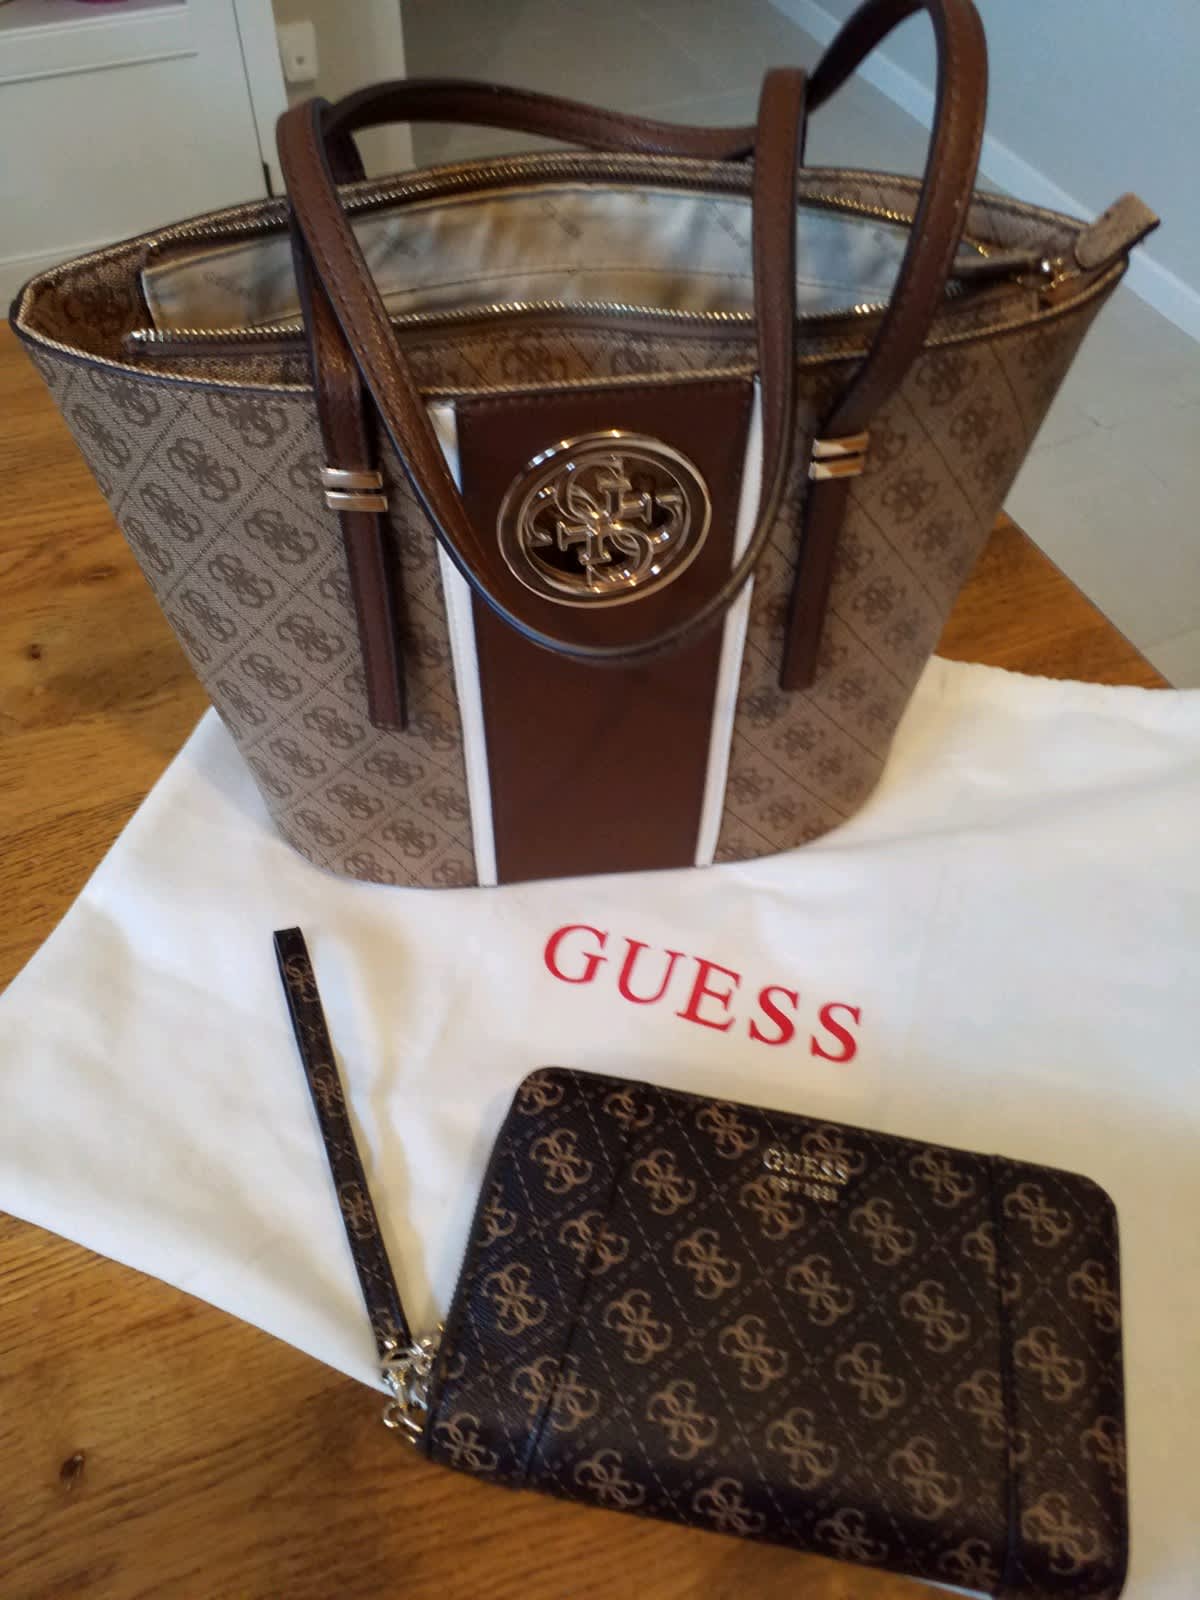 Guess, Bags, Guess Delaney Cognac Tote New With Tags And In Original  Packaging